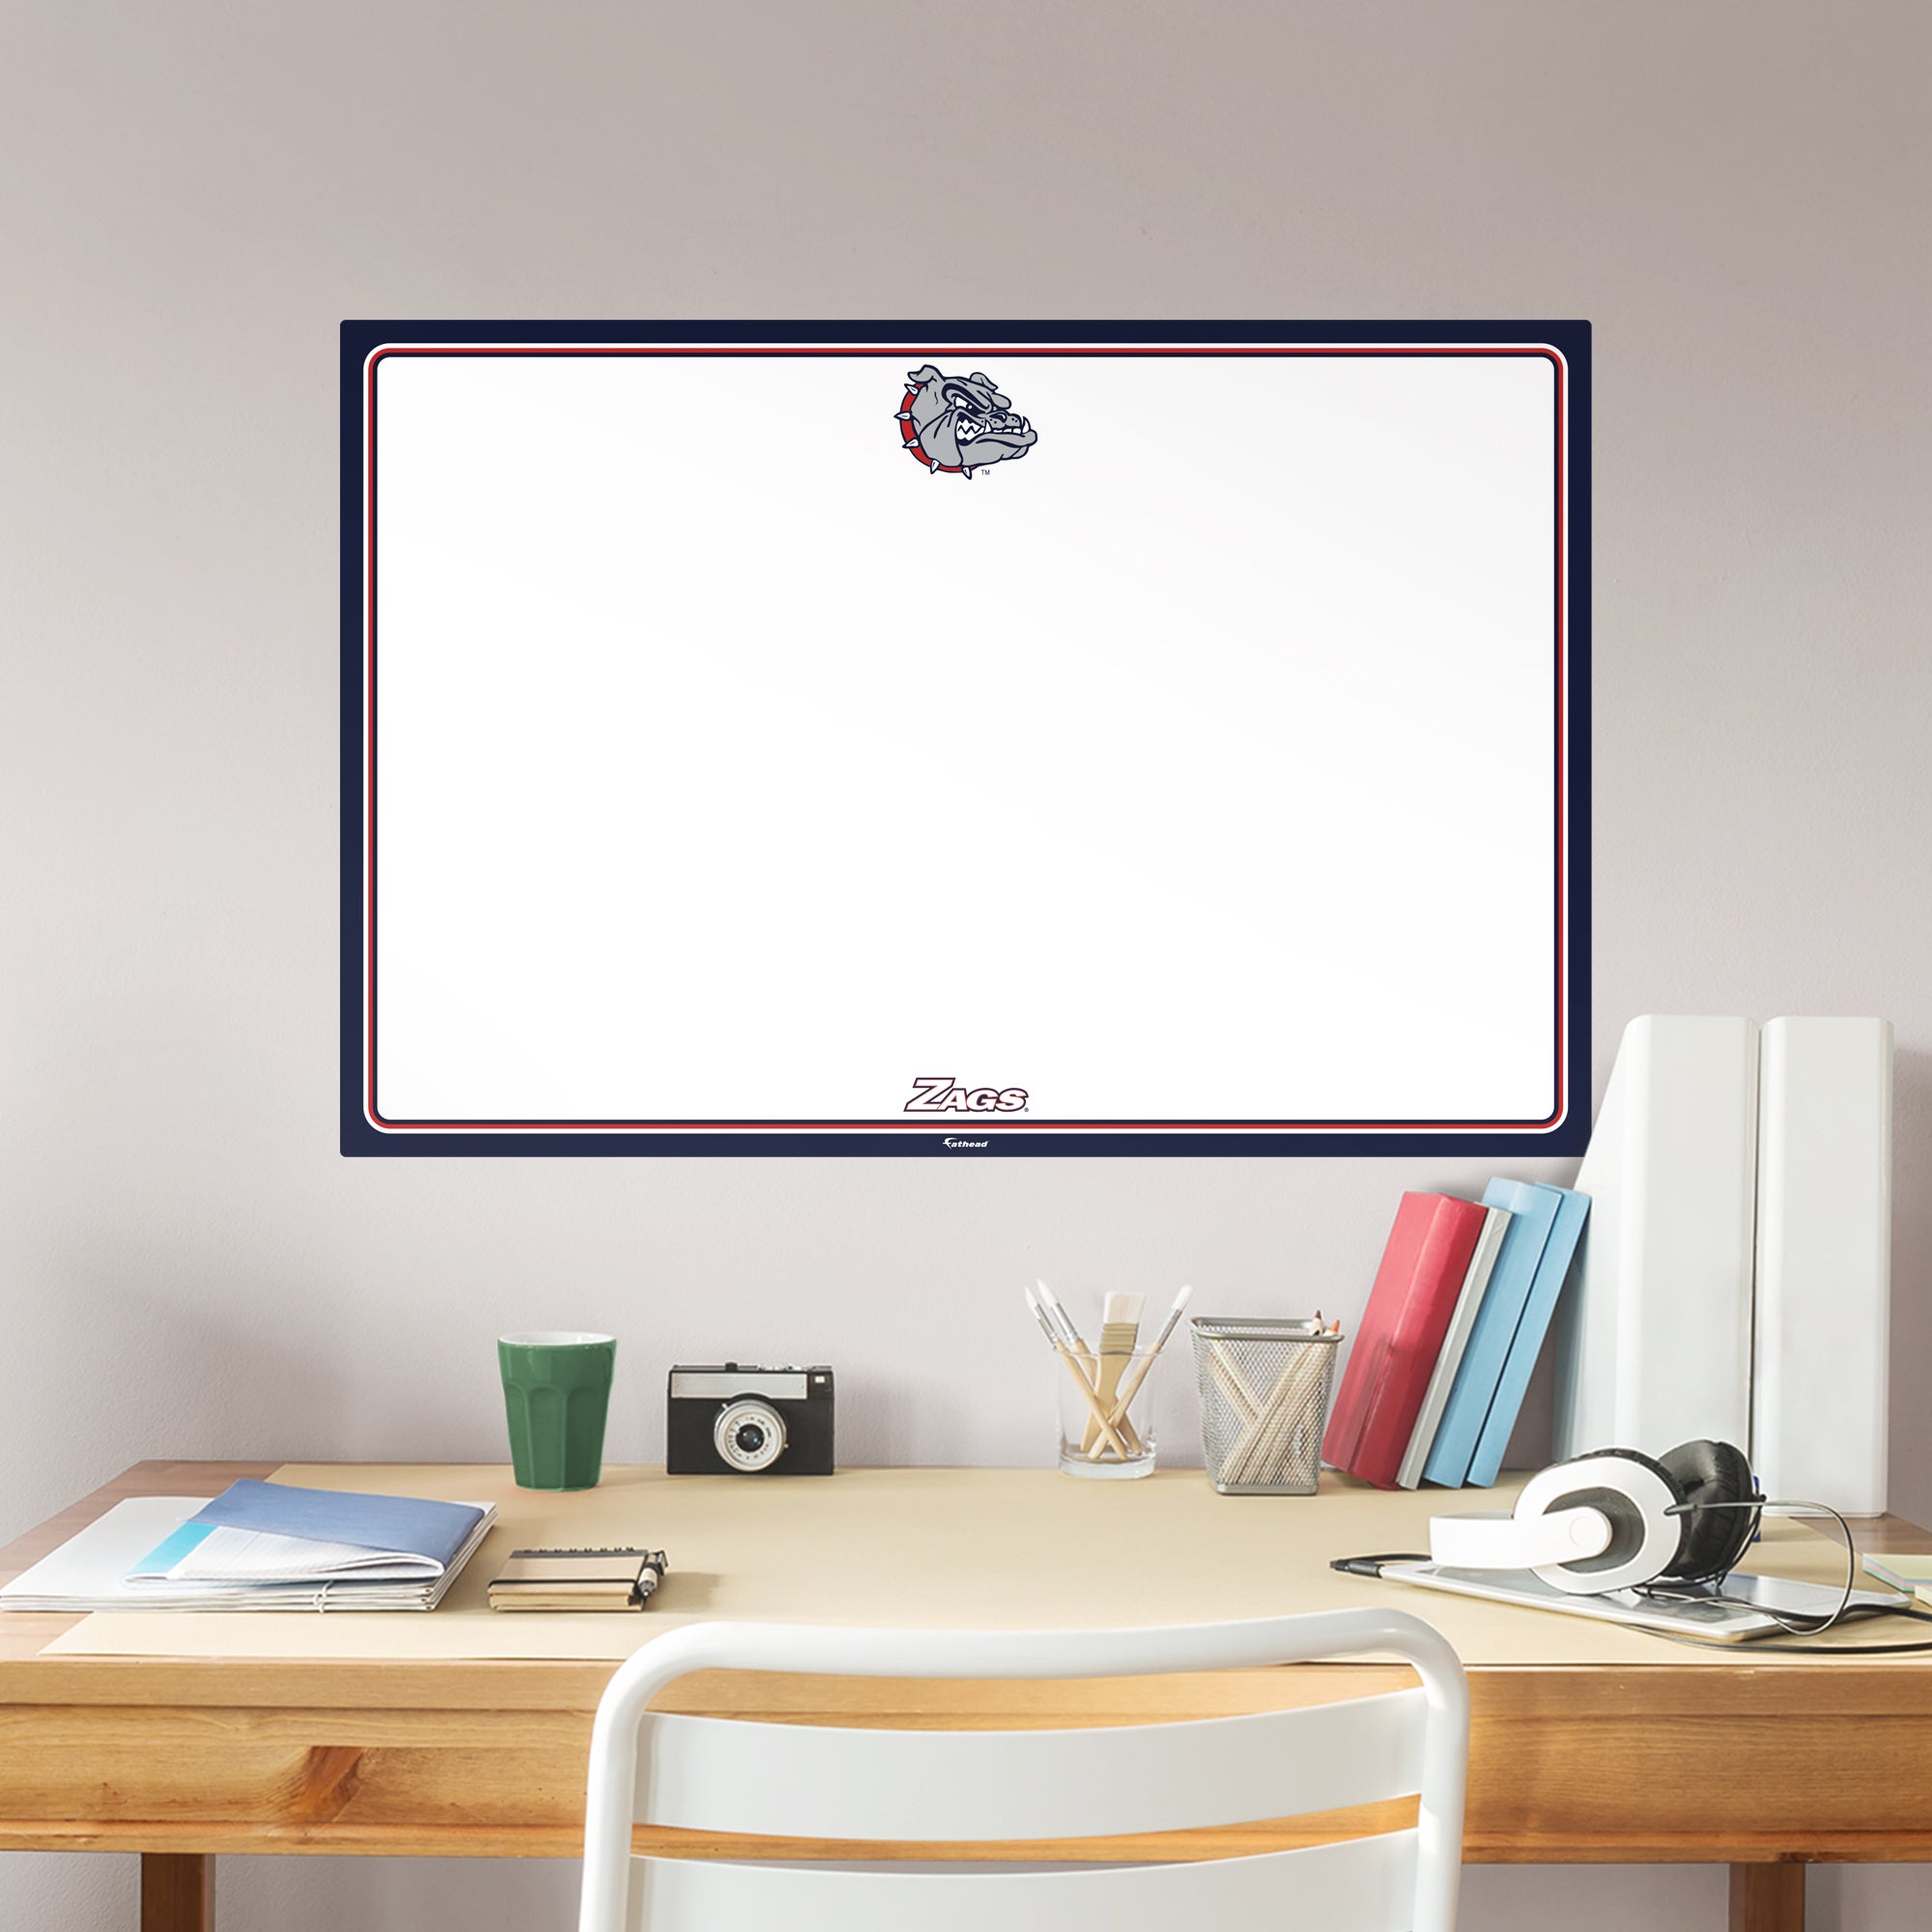 Gonzaga Bulldogs: Dry Erase Whiteboard - X-Large Officially Licensed NCAA Removable Wall Decal XL by Fathead | Vinyl